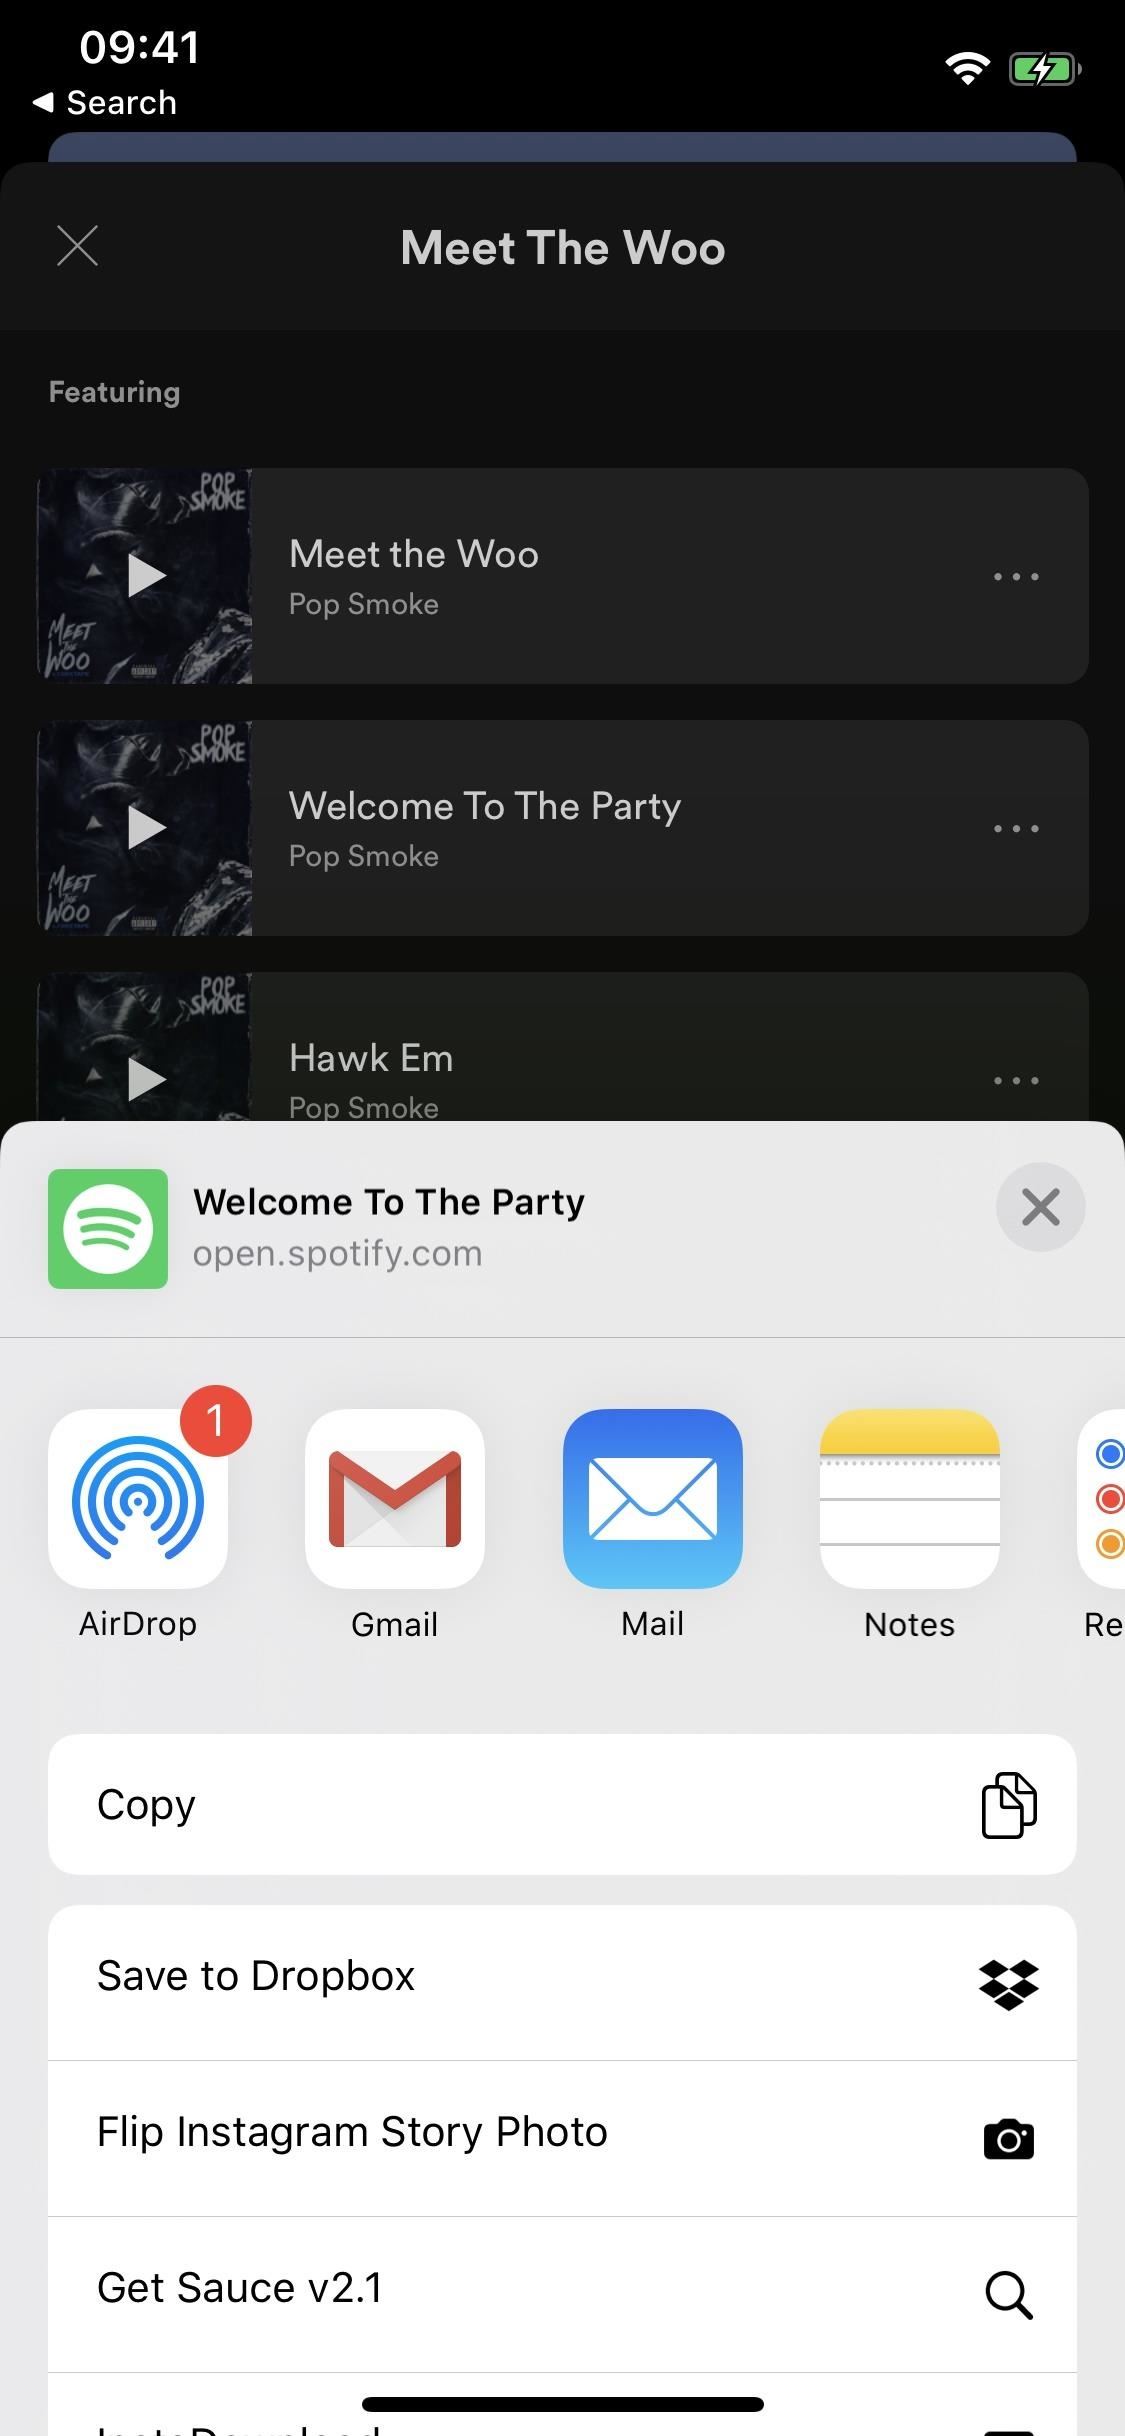 How to Share Apple Music Songs to Spotify Users (& Vice Versa) on Your iPhone